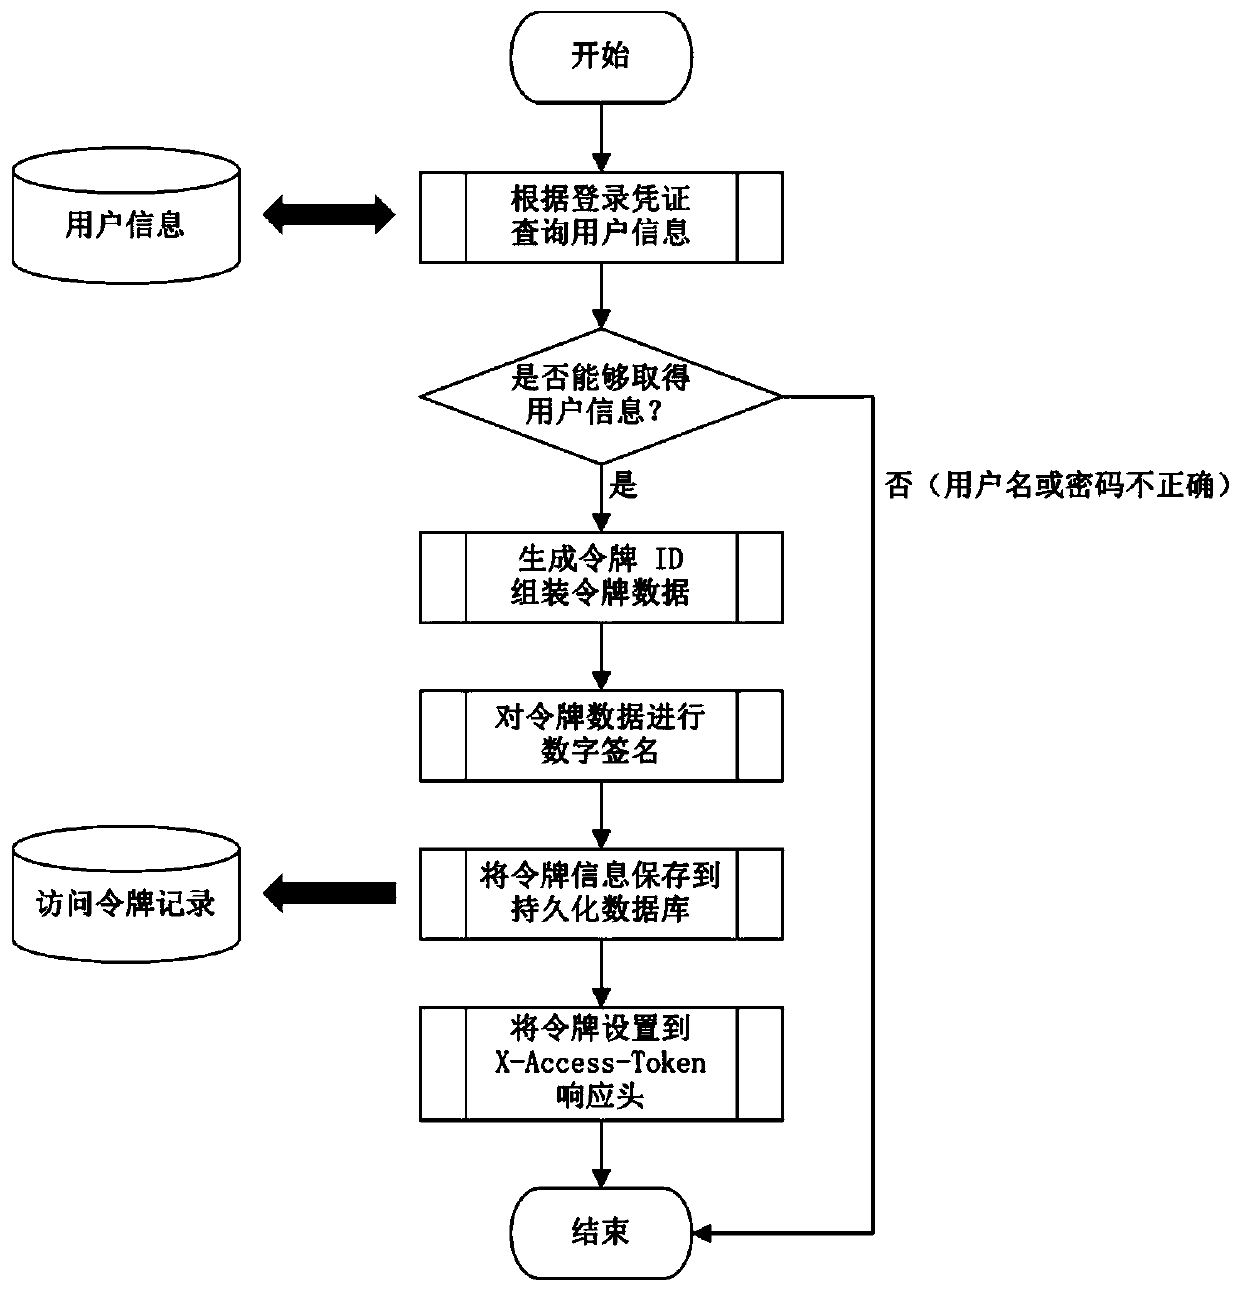 JWT-based authorization method capable of being manually revoked